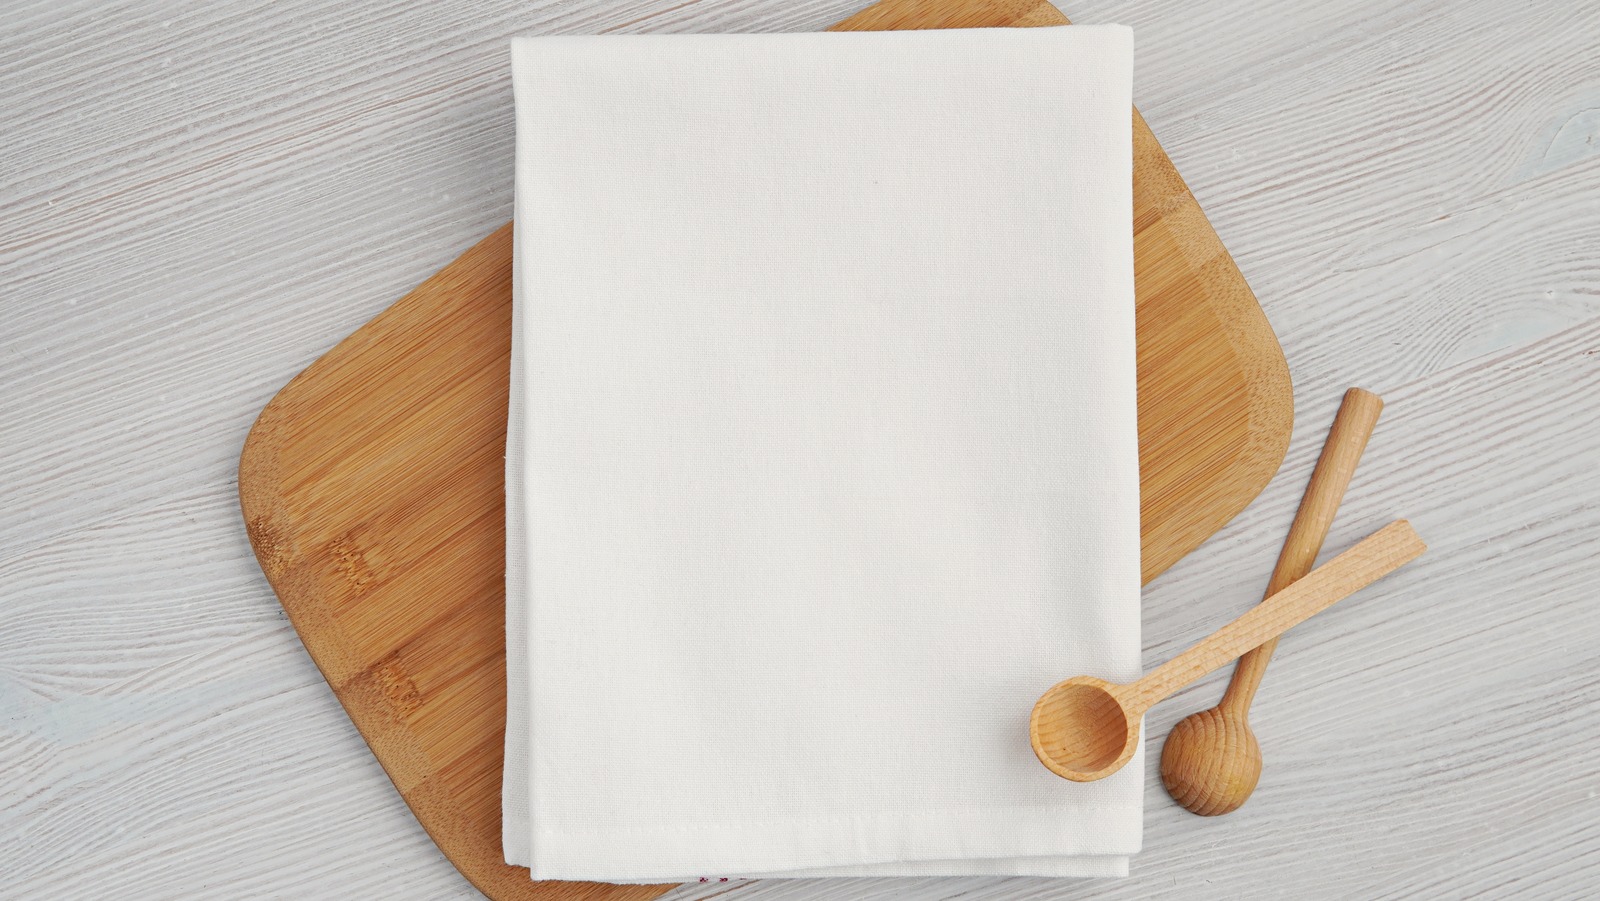 https://www.mashed.com/img/gallery/the-best-kitchen-towels-in-2022/l-intro-1670781371.jpg